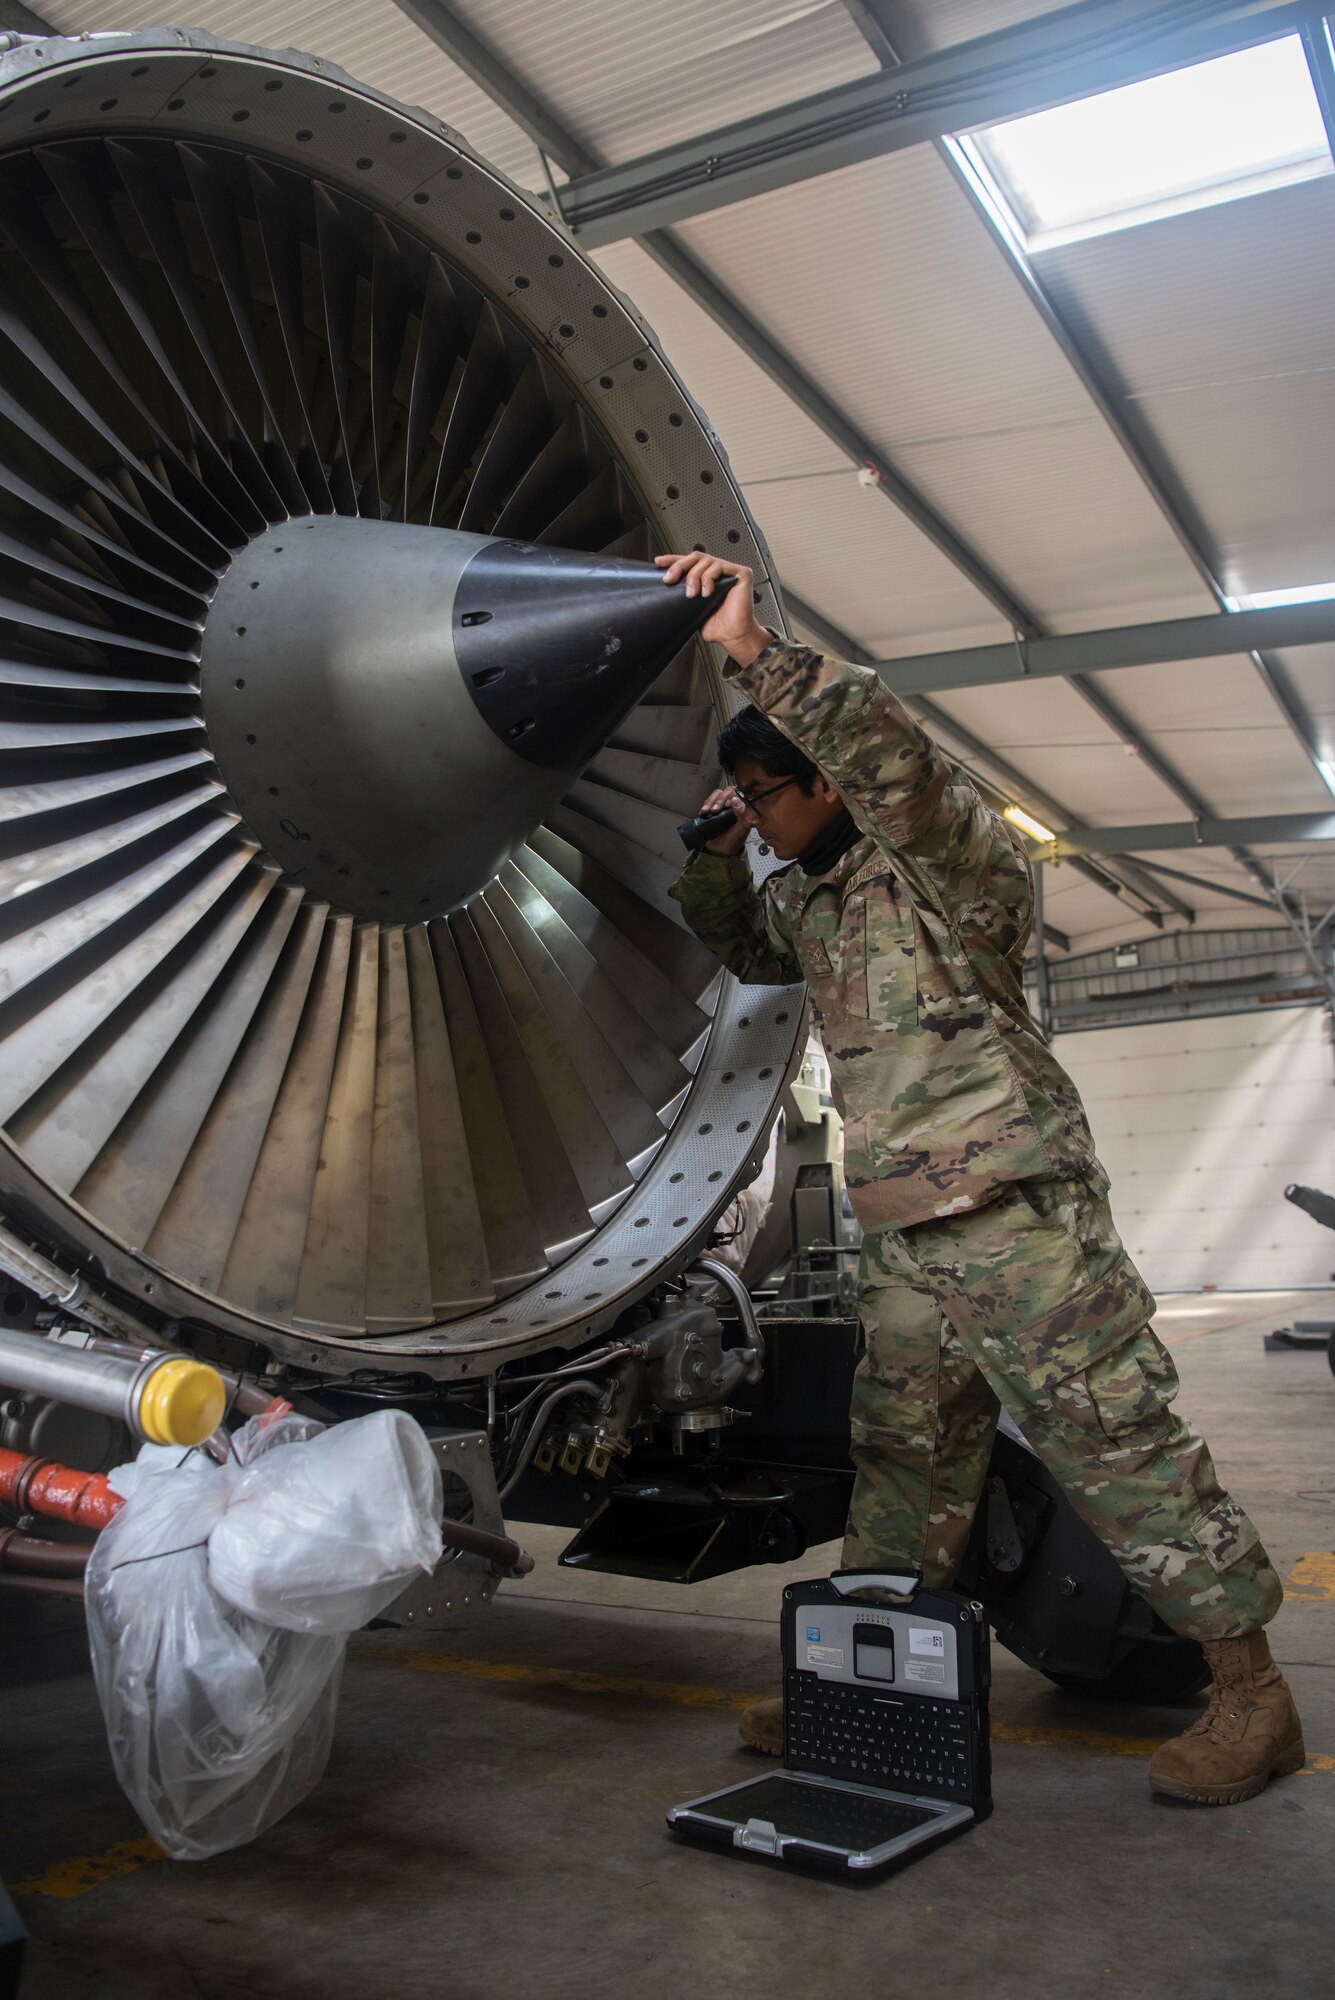 Airman 1st Class Rajendra Harilall, 100th Aircraft Maintenance Squadron aerospace propulsion journeyman, inspects the blades of an F108 turbofan engine at RAF Mildenhall, England, June 9, 2020. Maintainers frequently examine the blades for foreign object damage and to verify components can safely operate. (U.S. Air Force photo by Airman 1st Class Joseph Barron)